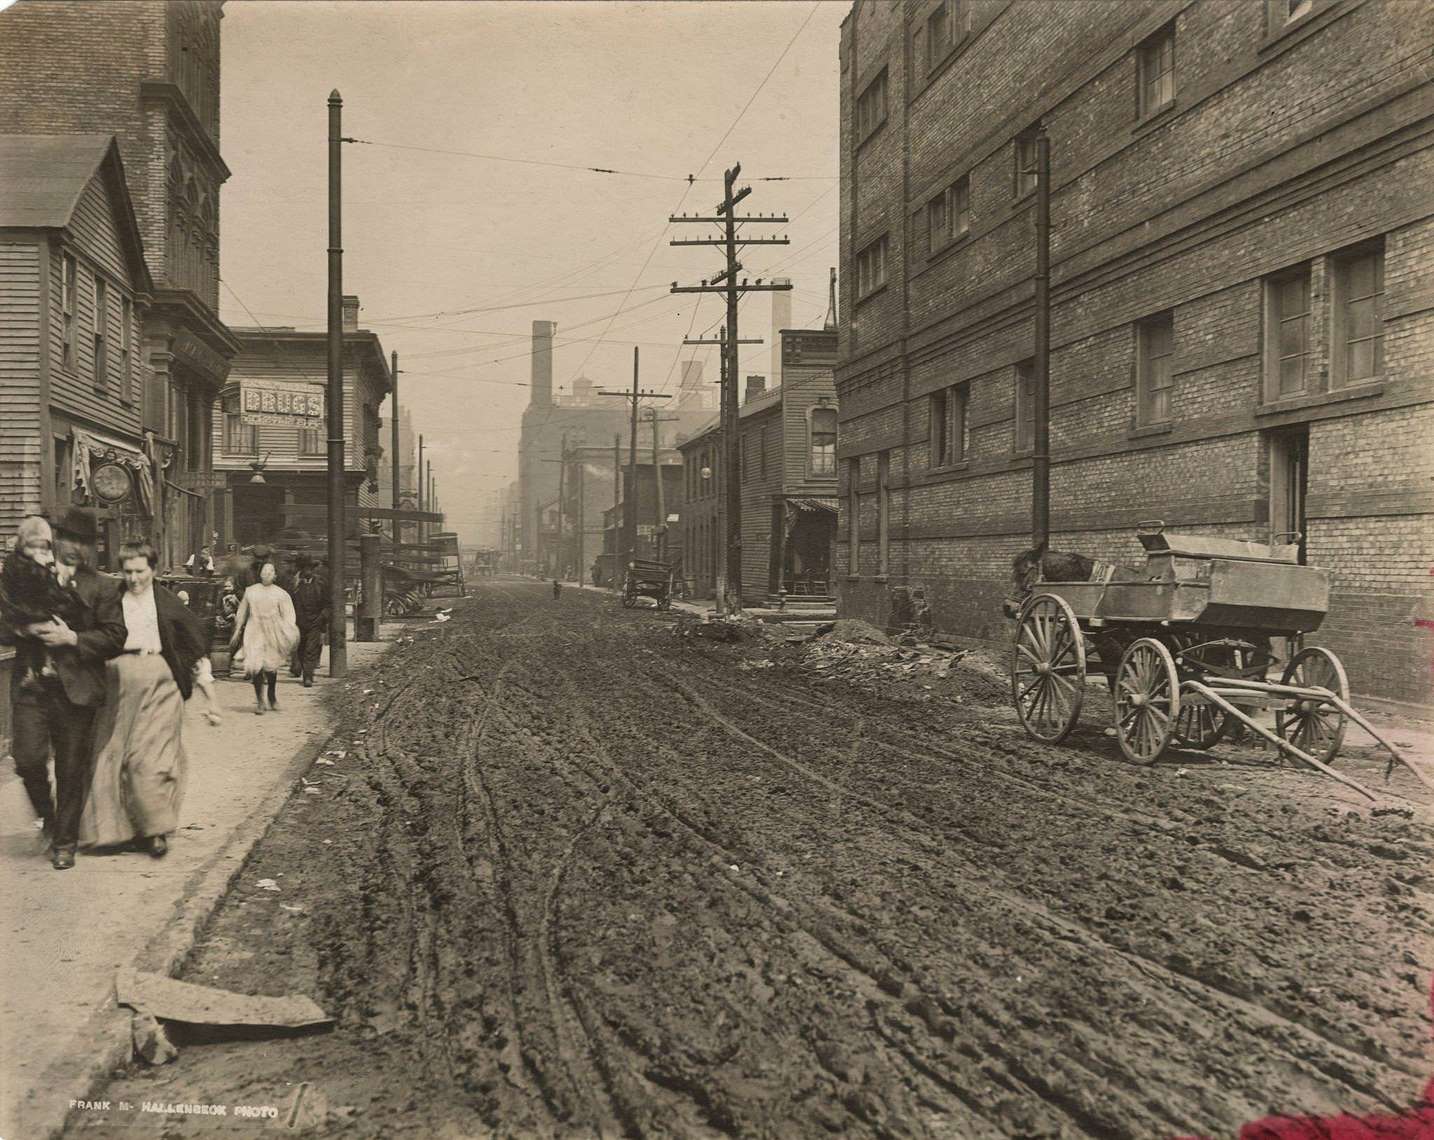 Jefferson Street north from Ewing Street, Chicago, Illinois, April 28, 1910s.